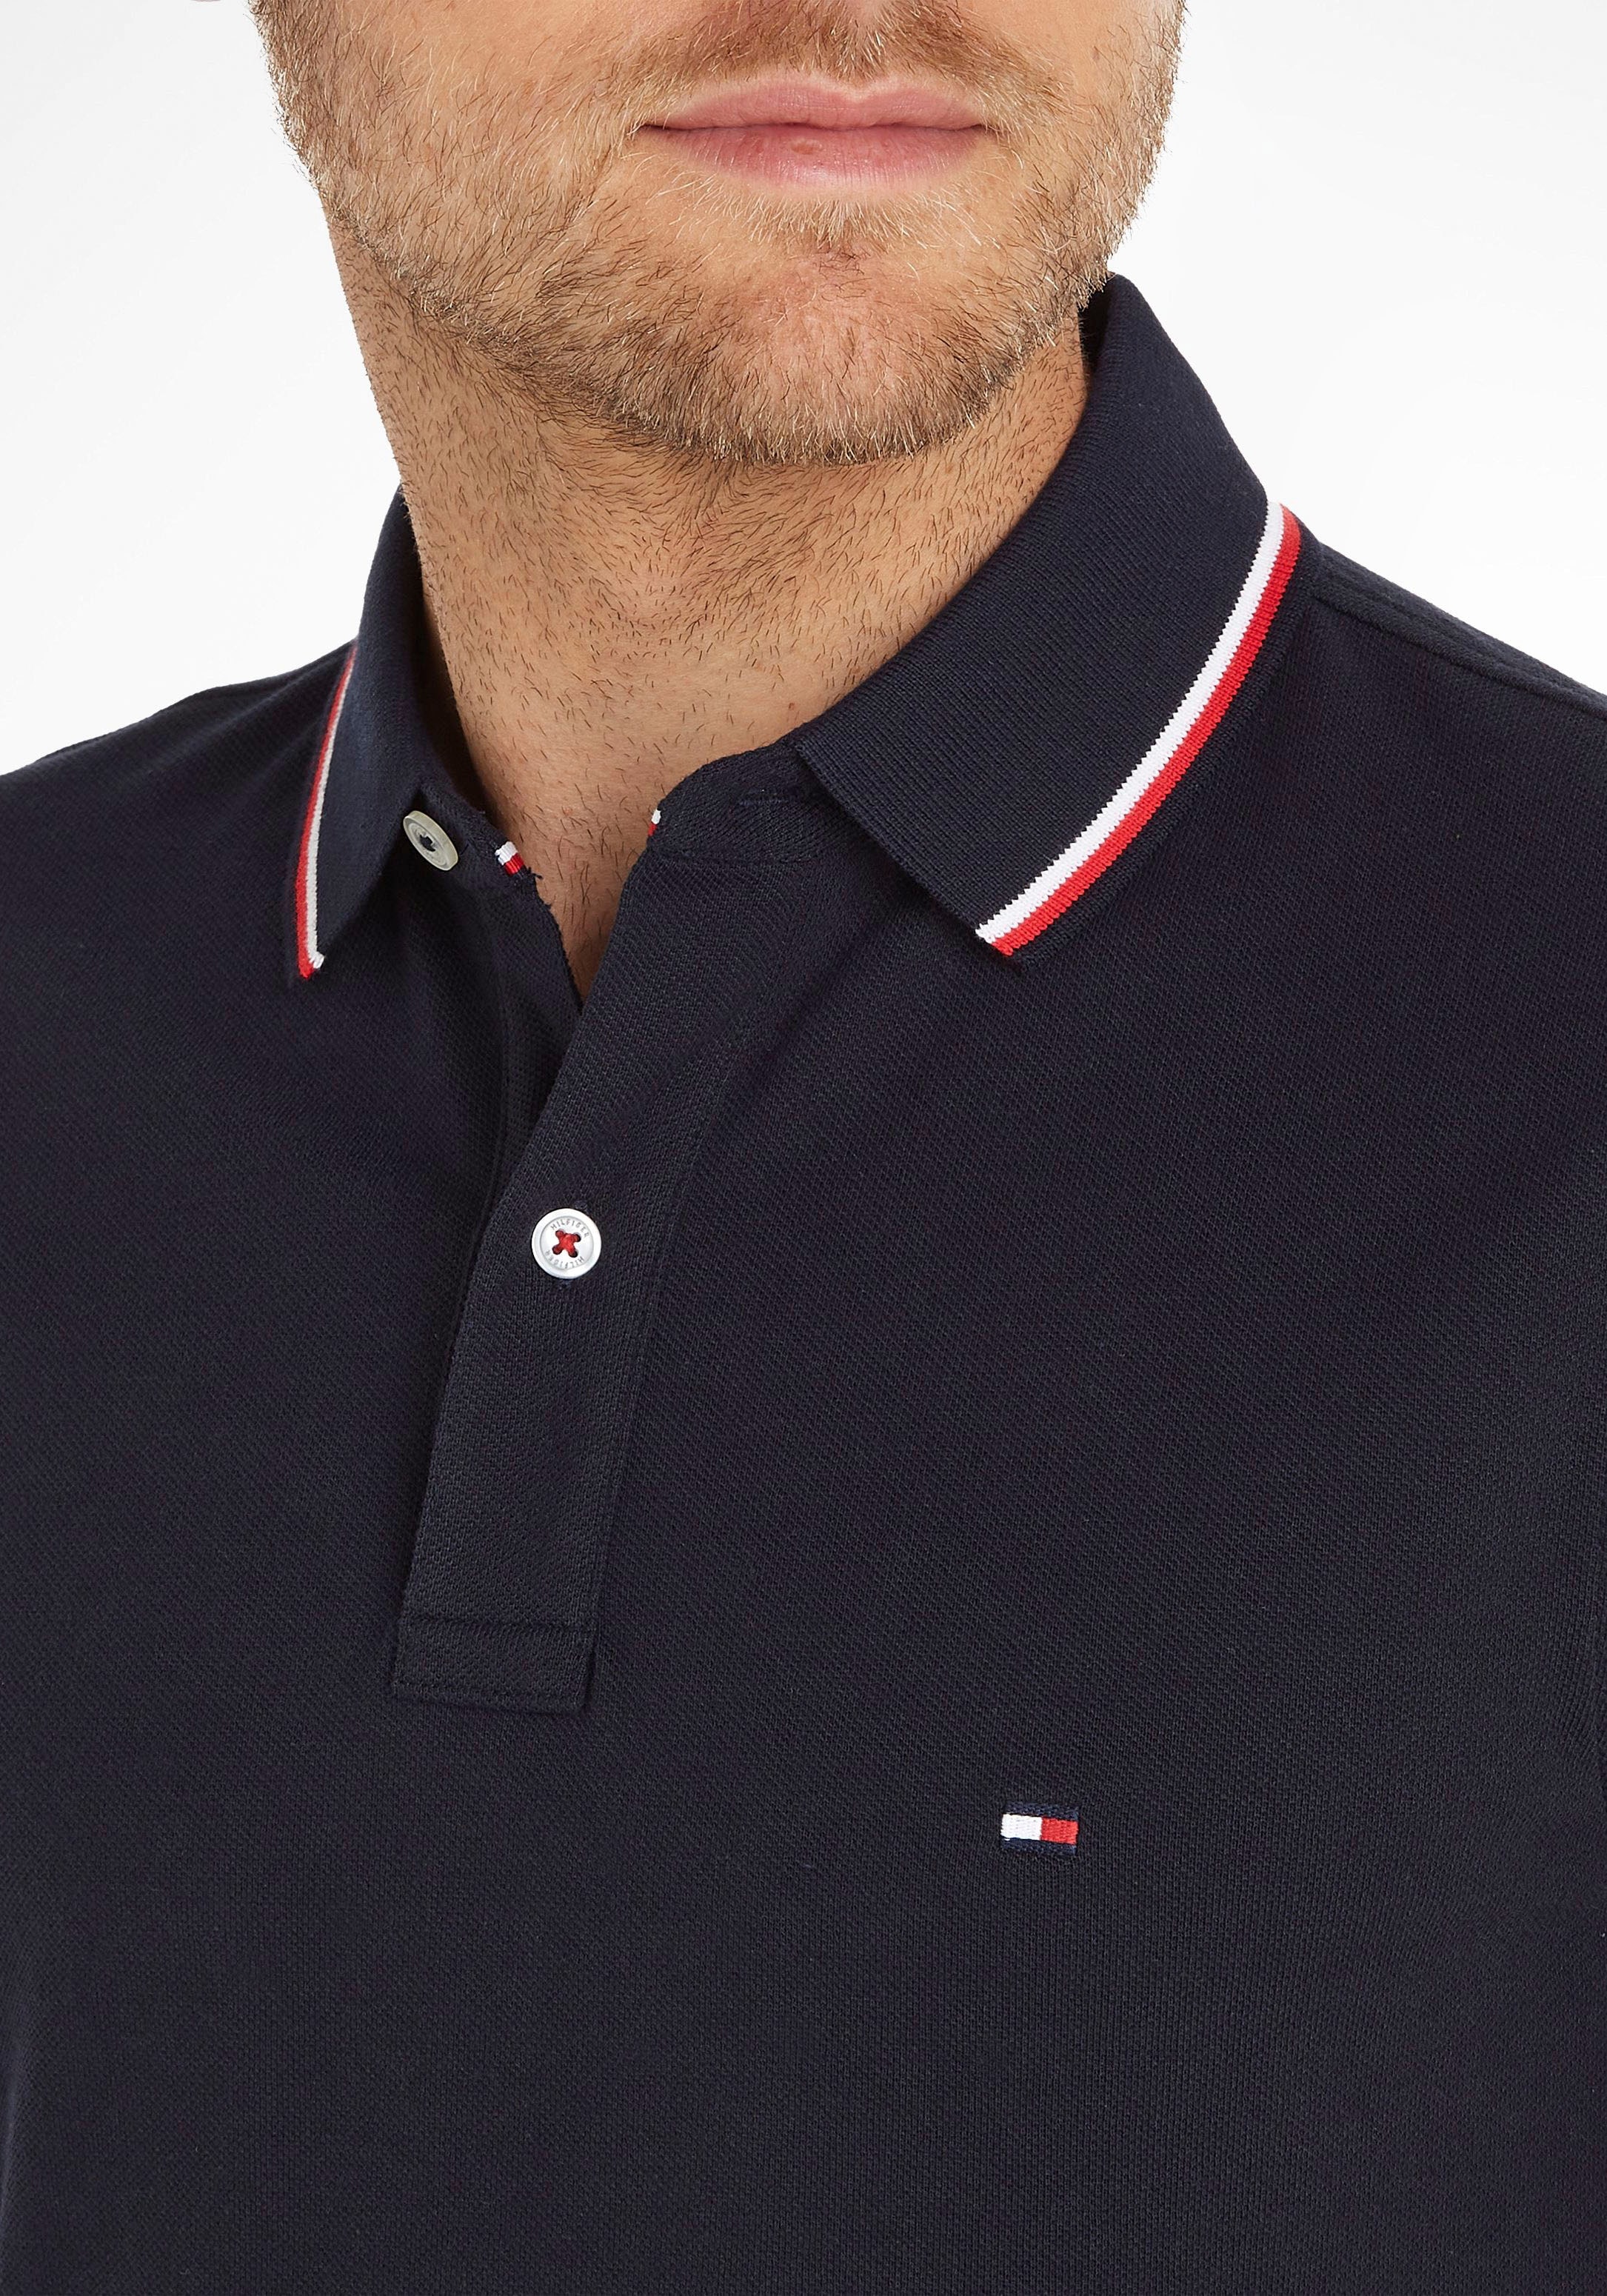 Hilfiger POLO« kaufen bei OTTO »TOMMY SLIM online Tommy Poloshirt TIPPED